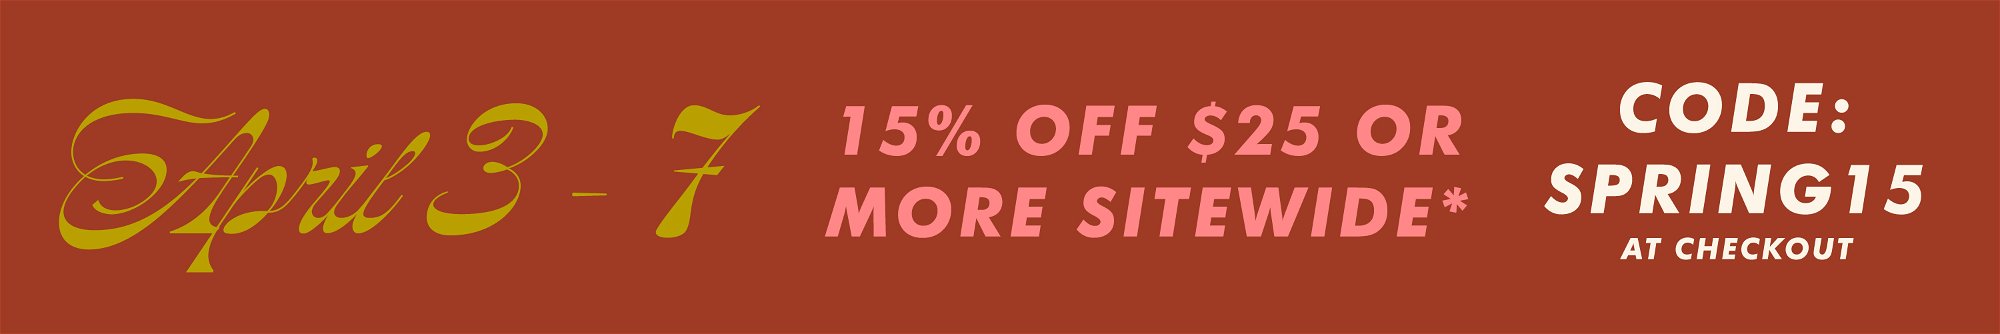 April 3-7, 15% off $25 or more sitewide with code SPRING15 at checkout